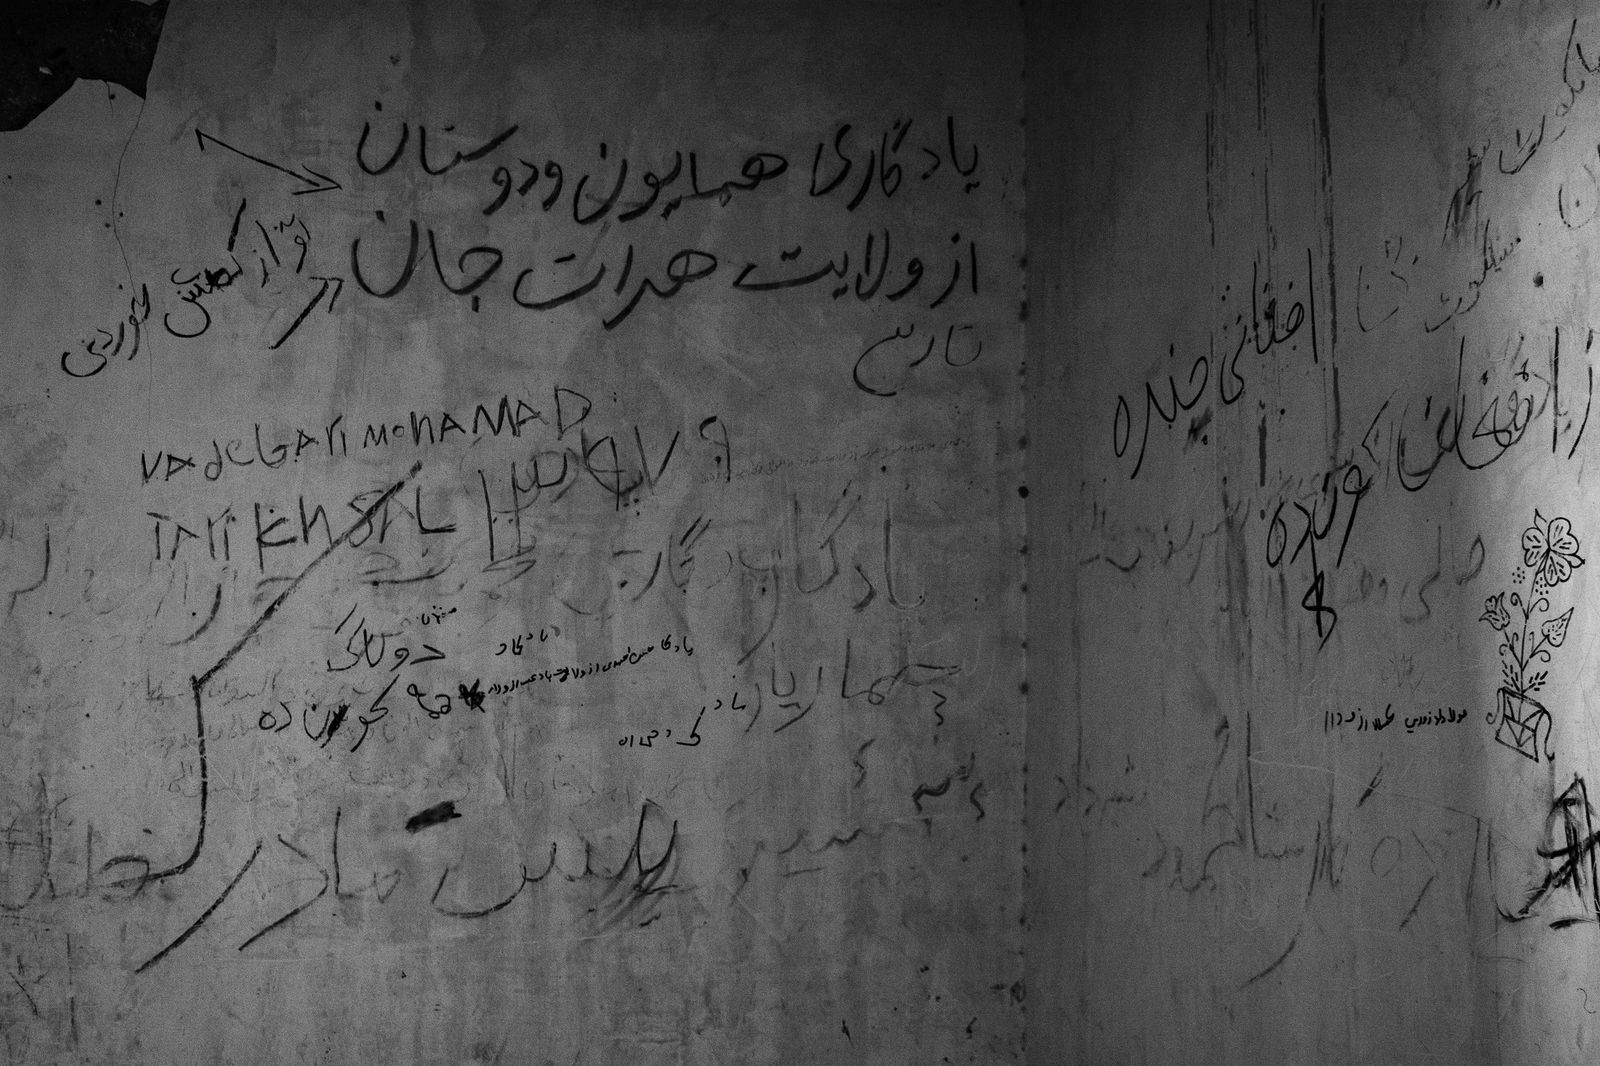 © Zobair Movahhed - Graffiti adorns the walls of a room on the Afghanistan-Iranian border, scrawled by Afghan refugees.